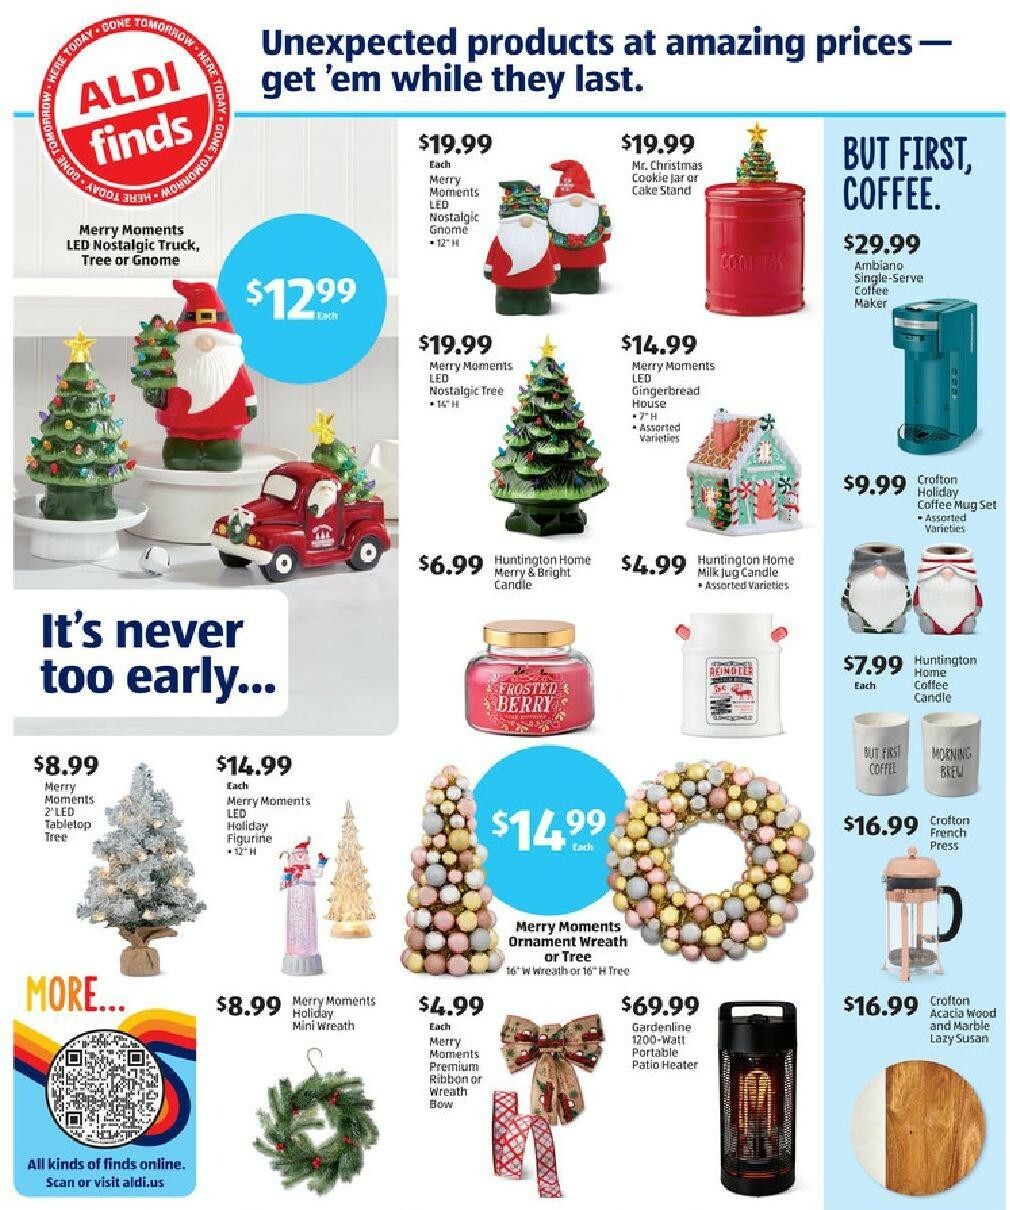 ALDI Weekly Ad from October 23